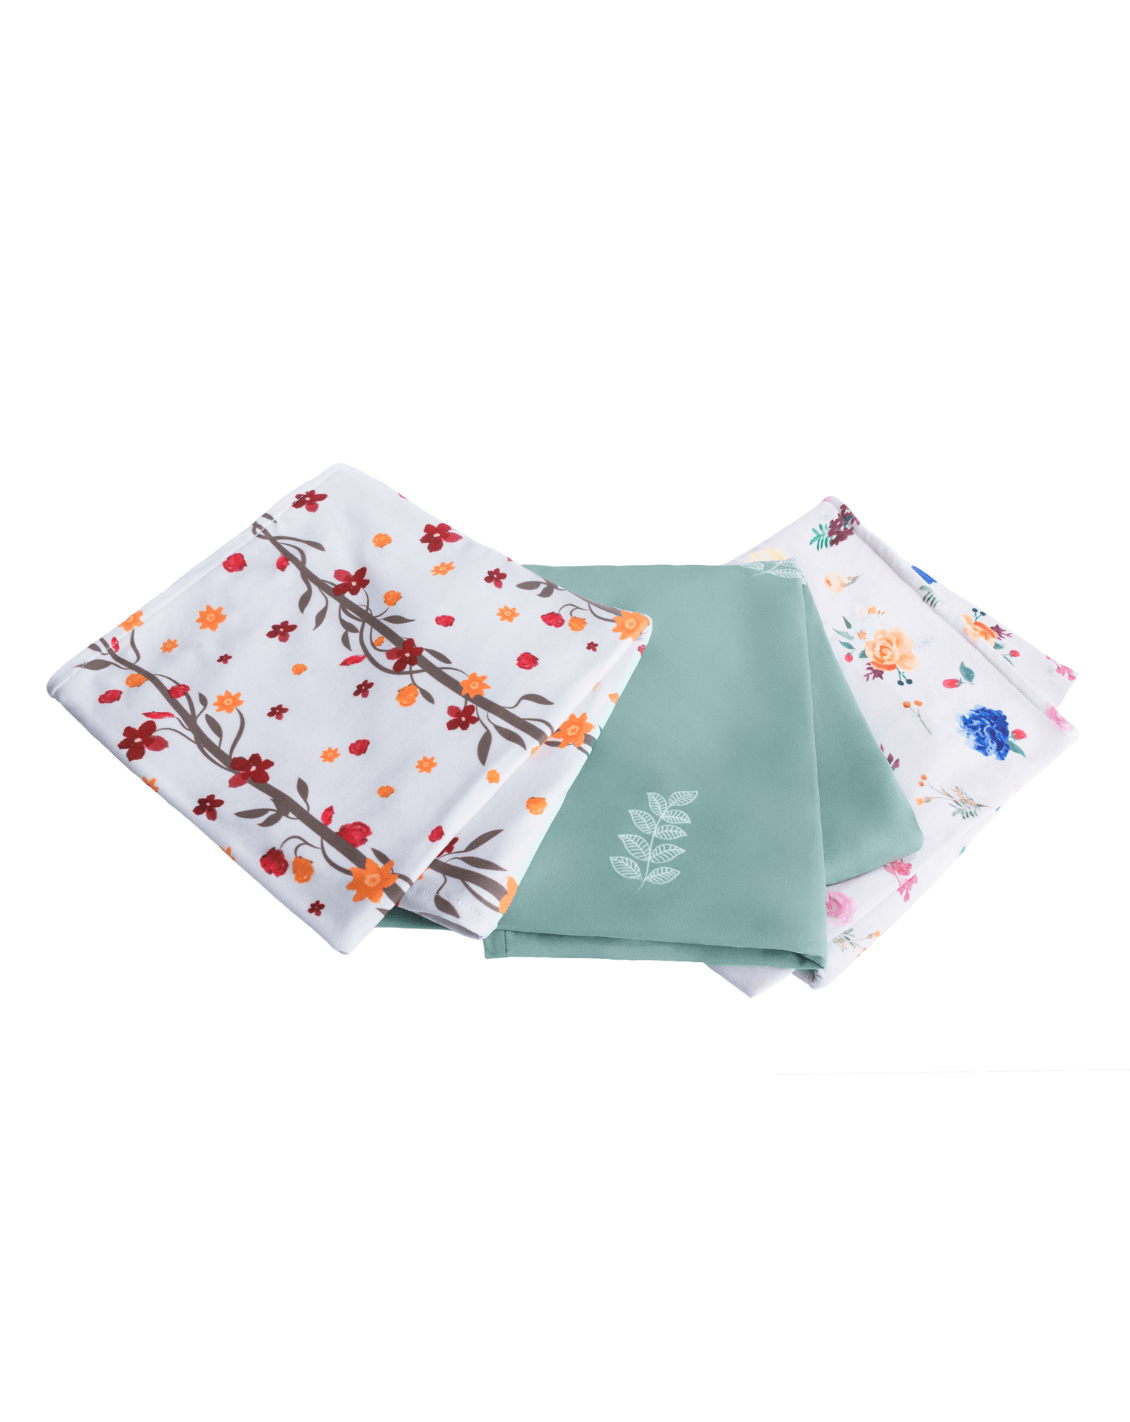 Floral print swaddle set for newborn girls from By Bella Boutique,